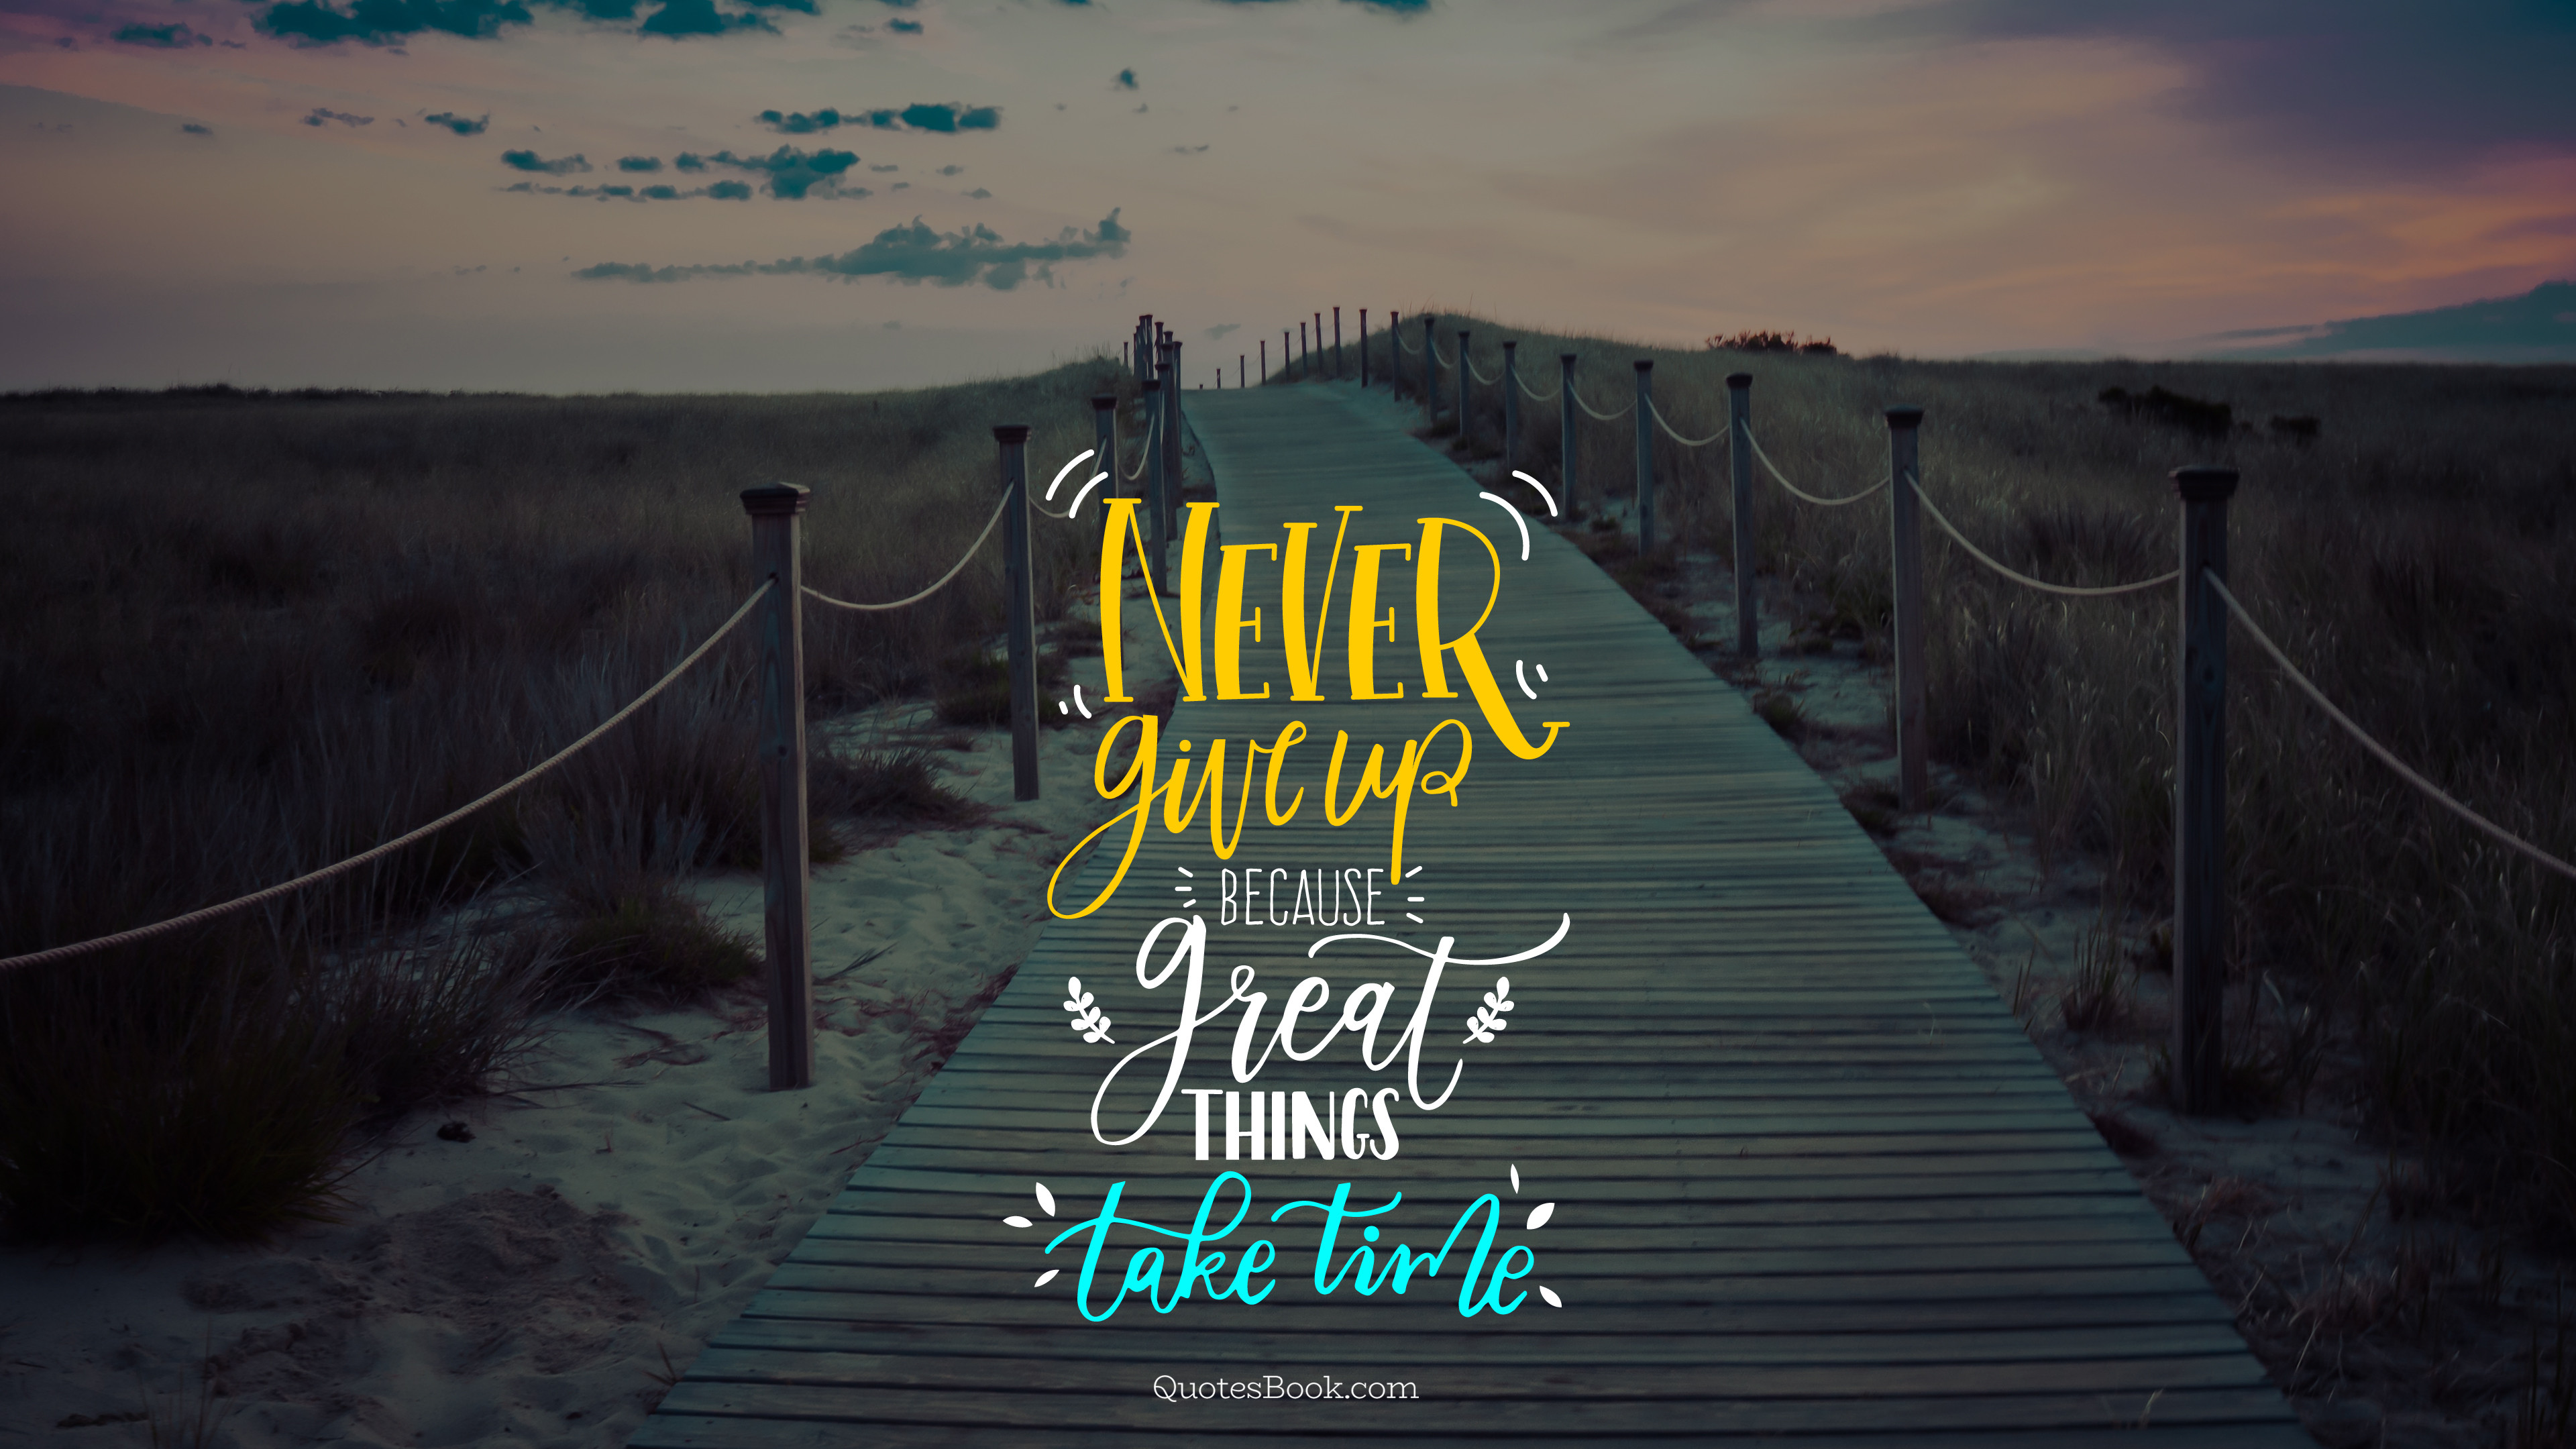 Never give up because great things take time - Page 6 - QuotesBook